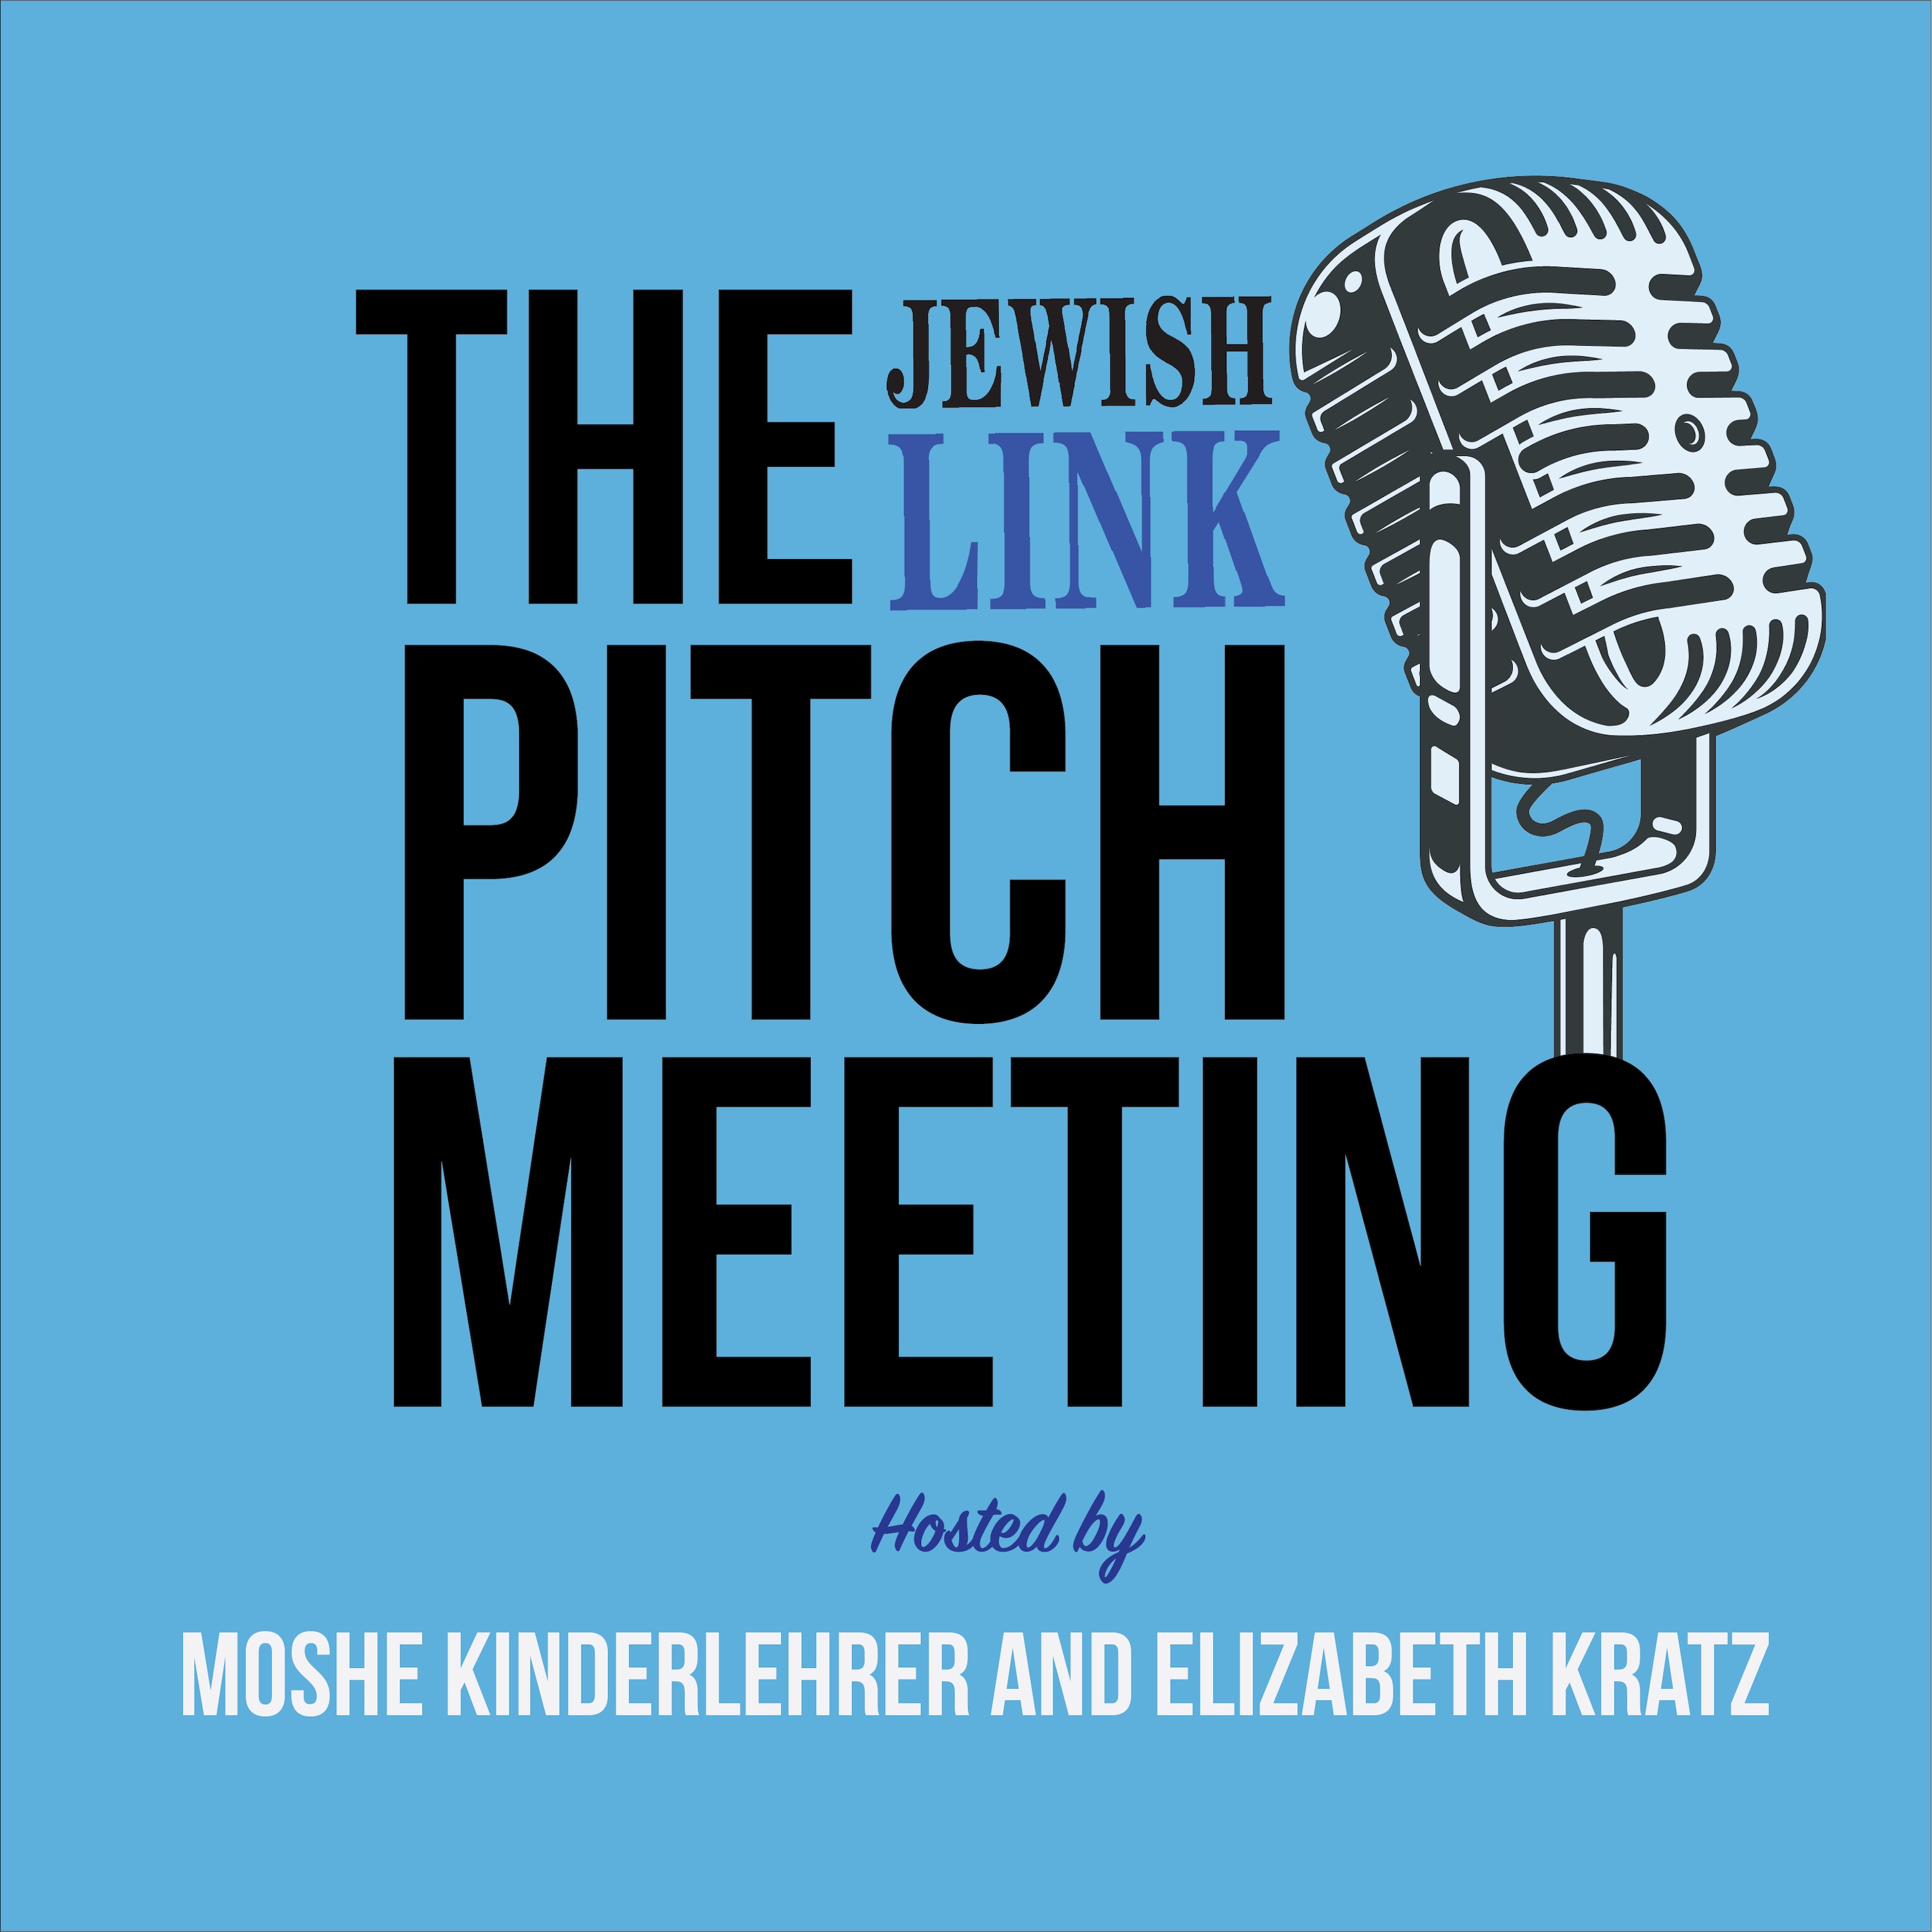 Artwork for The Jewish Link Pitch Meeting